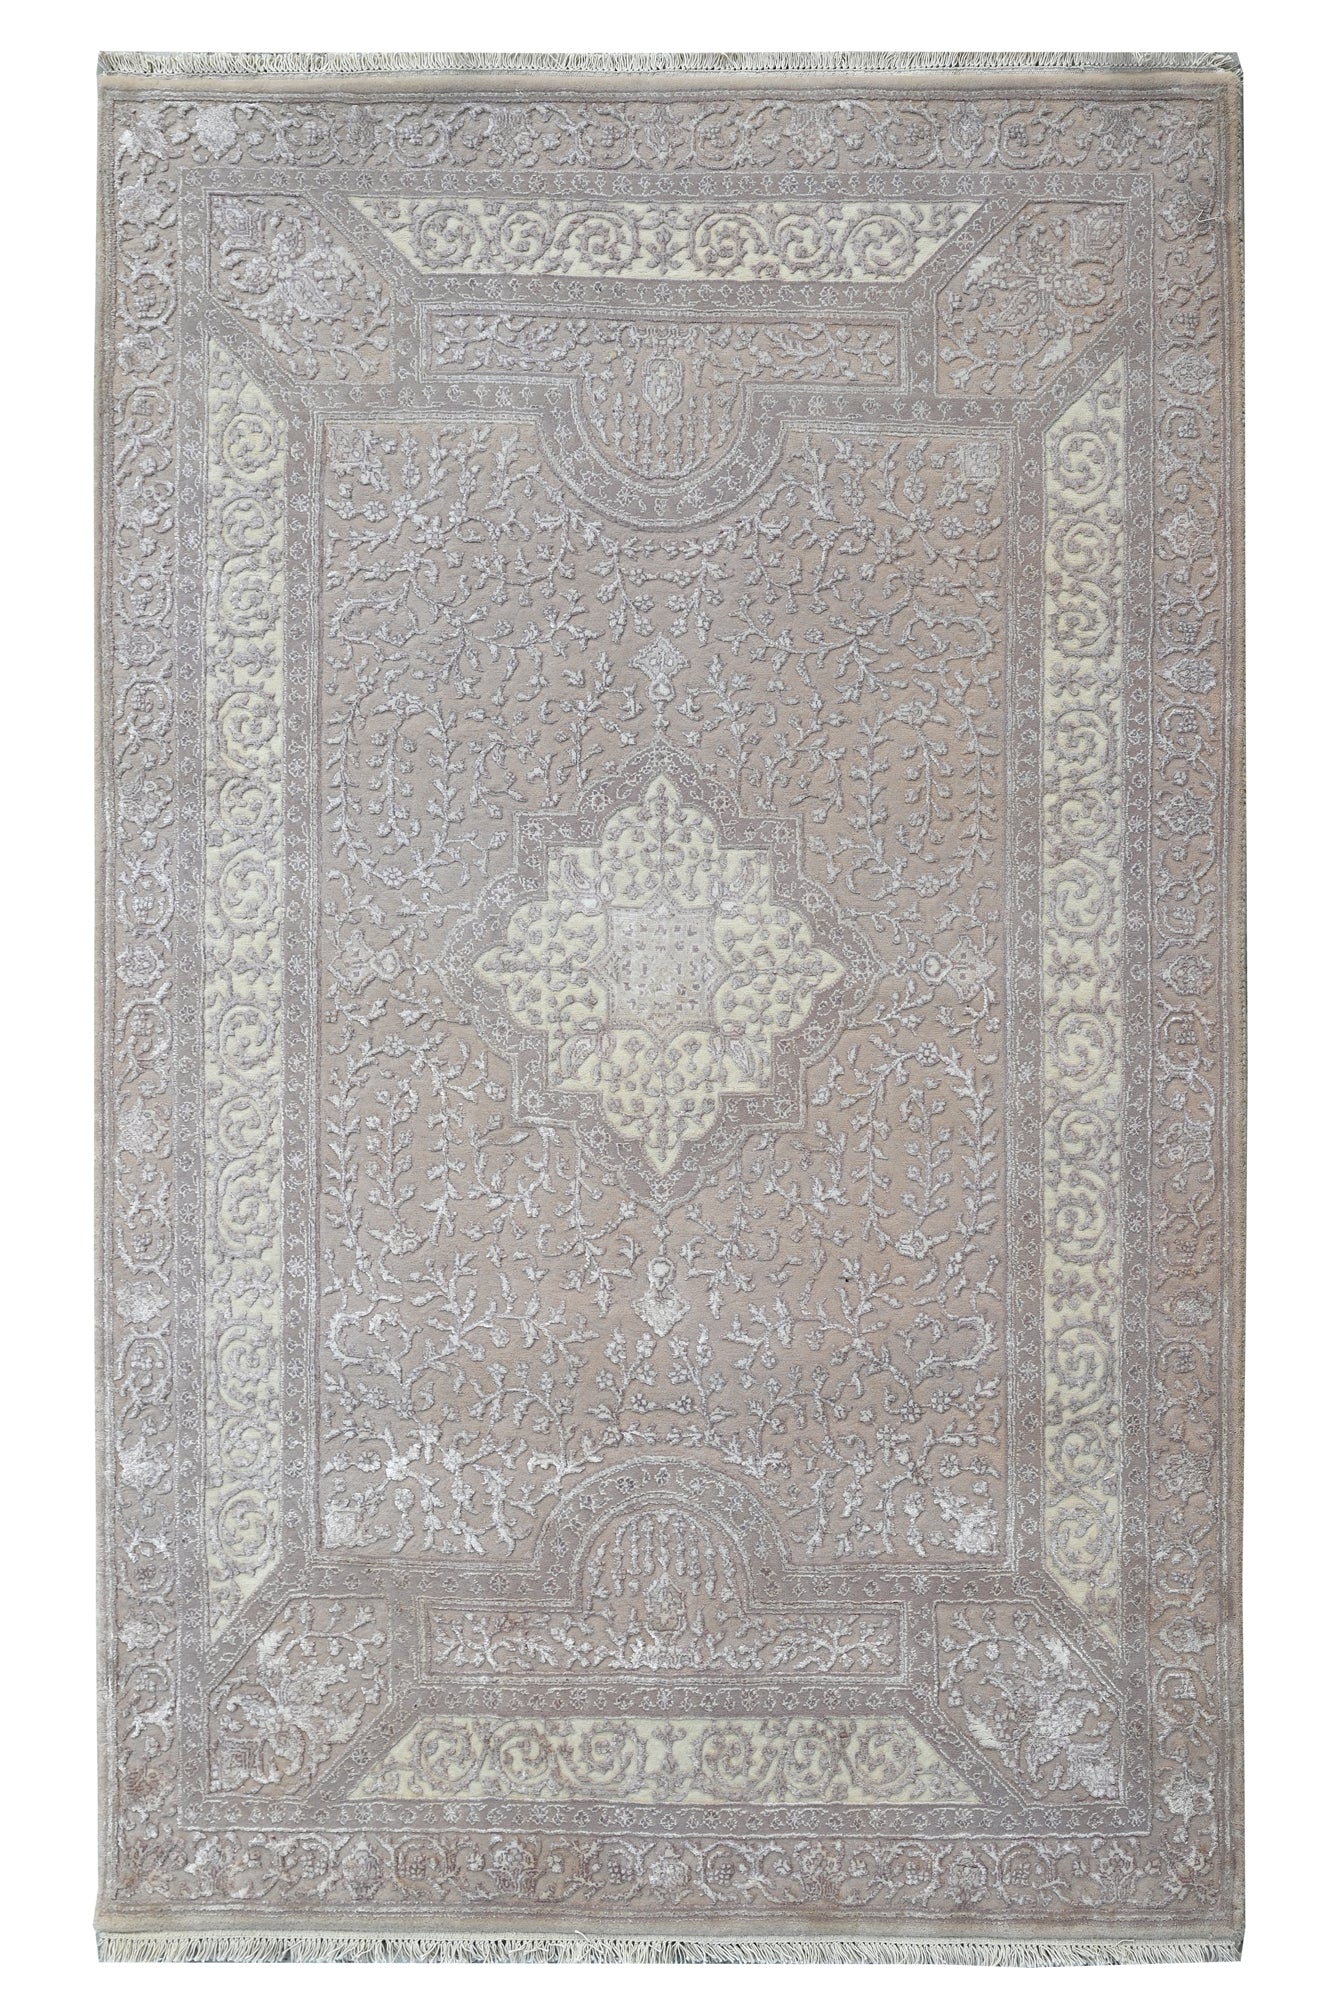 Nain Wool Viscose HandKnotted Rug - The Revival Project